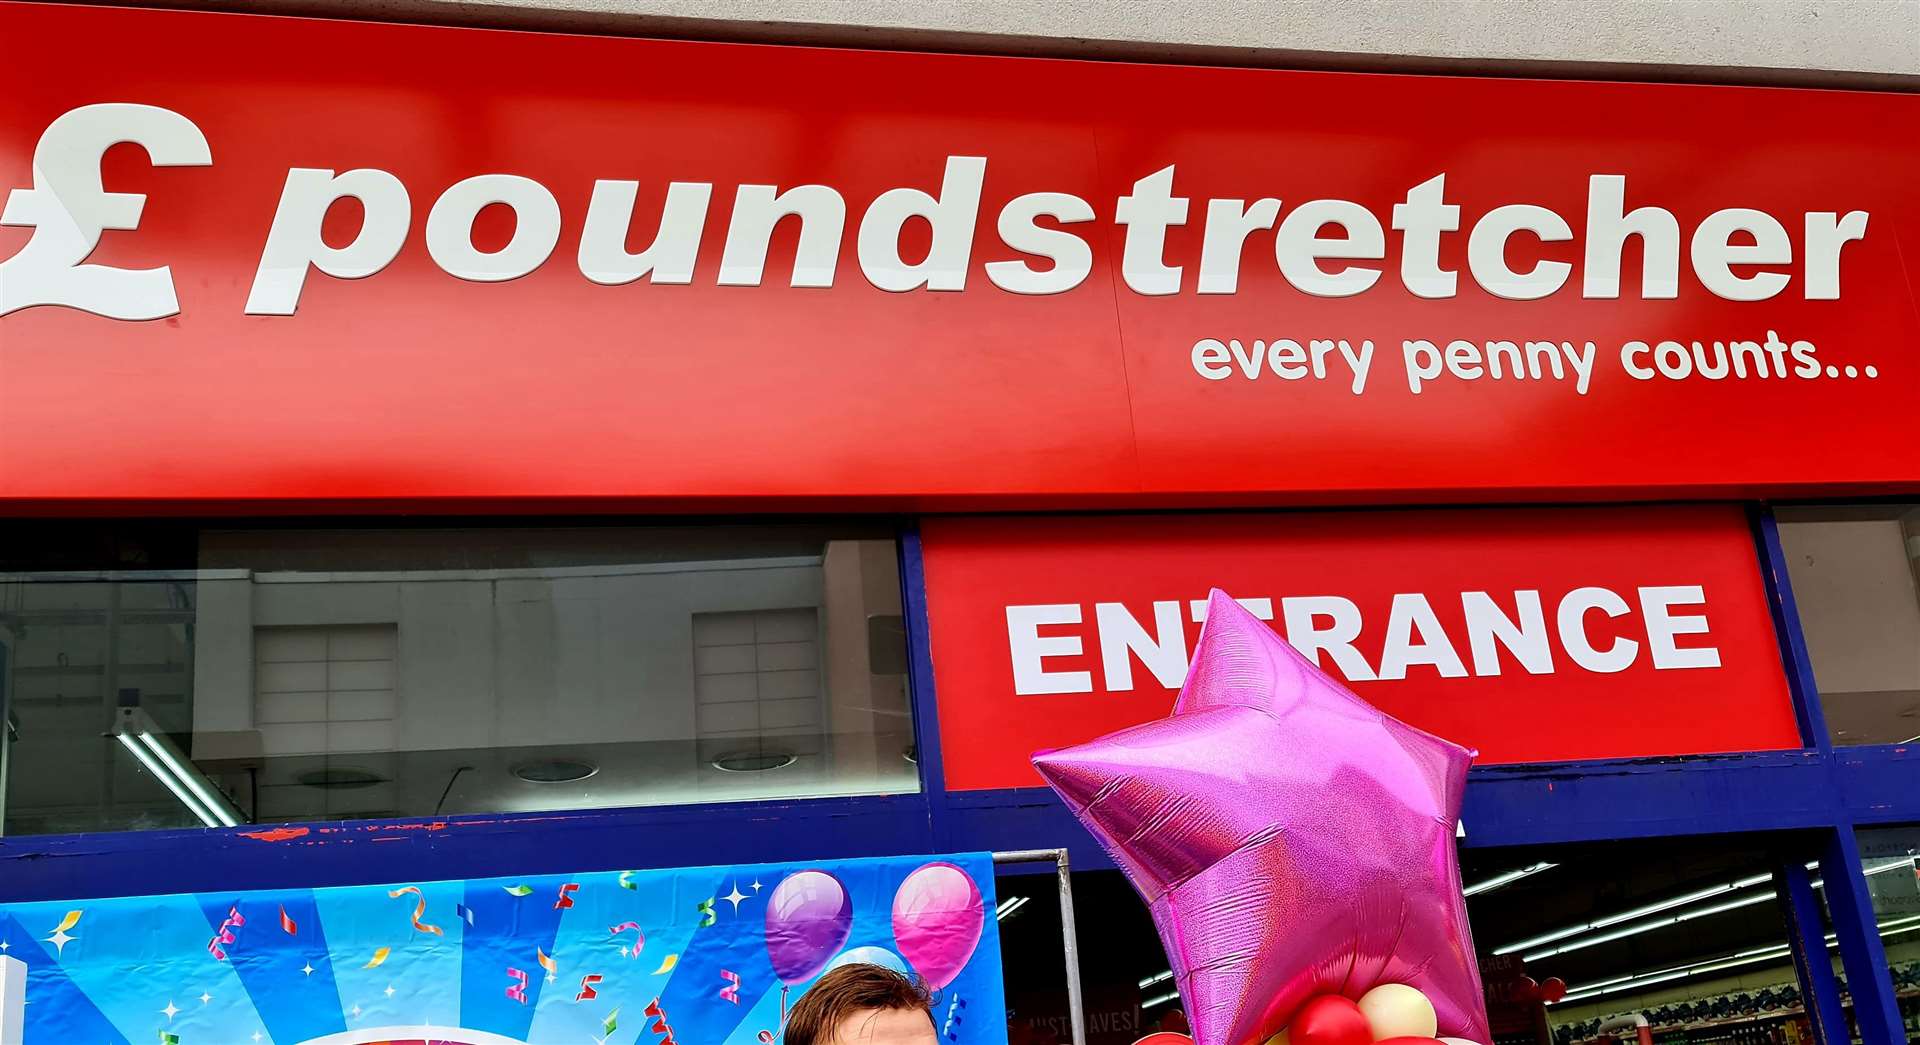 Poundstretcher is opening in High Street, Gillingham, at the end of August